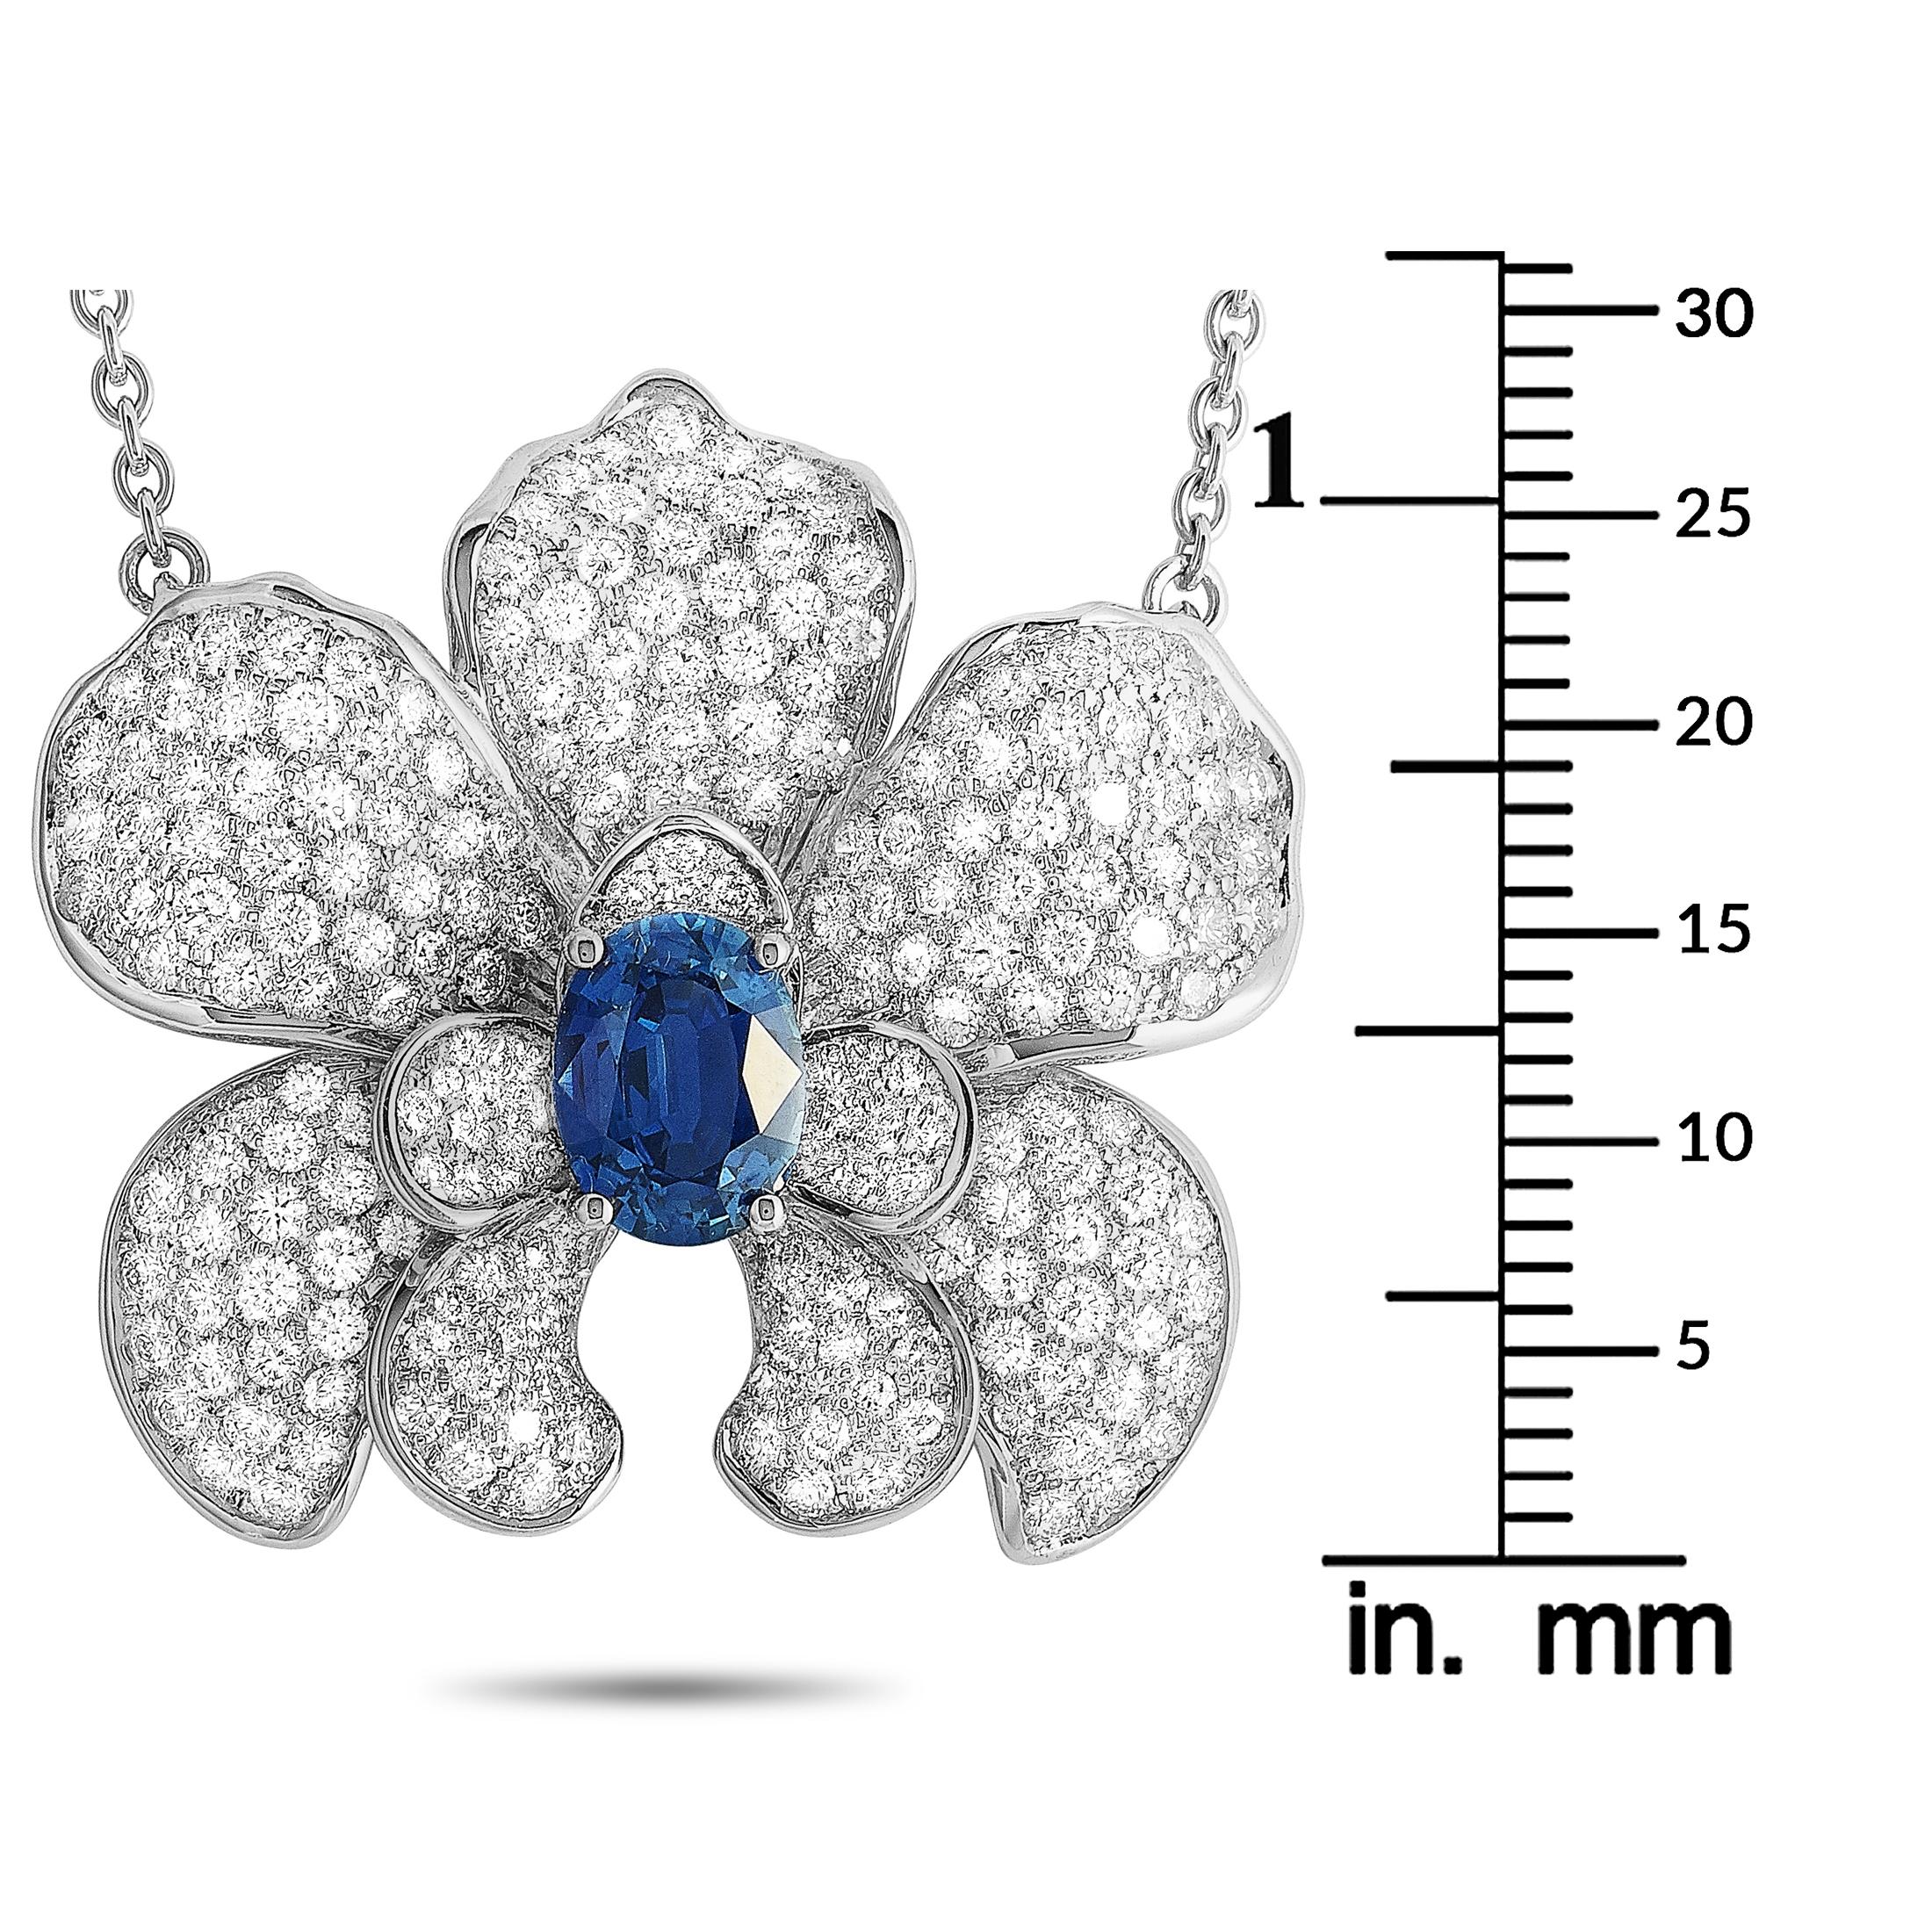 The Carrera y Carrera “Orquídeas” necklace is made of 18K white gold and embellished with a 1.56 ct sapphire and a total of 2.93 carats of diamonds. The necklace weighs 11.98 grams and is presented with a 16” chain and a pendant that measures 1.12”